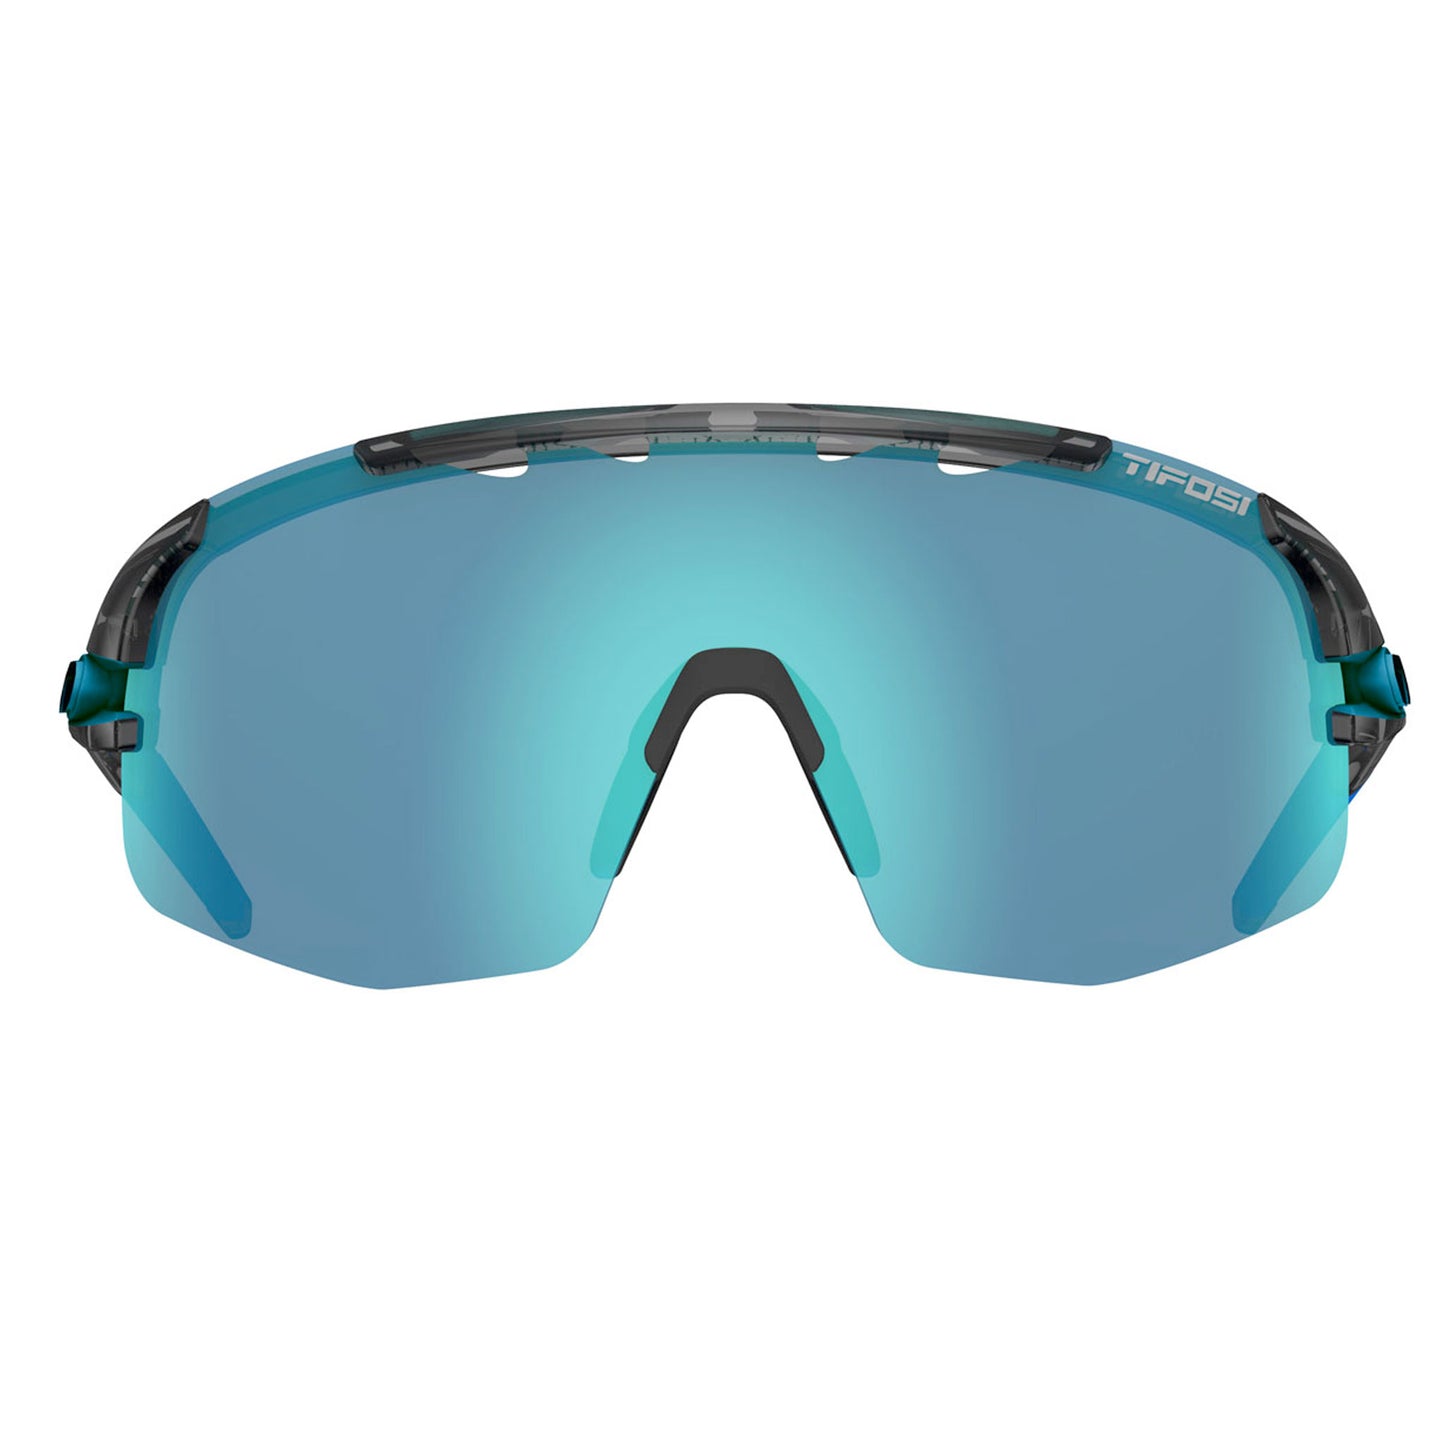 Tifosi Sledge Lite Cycling Sunglasses, Crystal Smoke with 3 interchangeable lenses